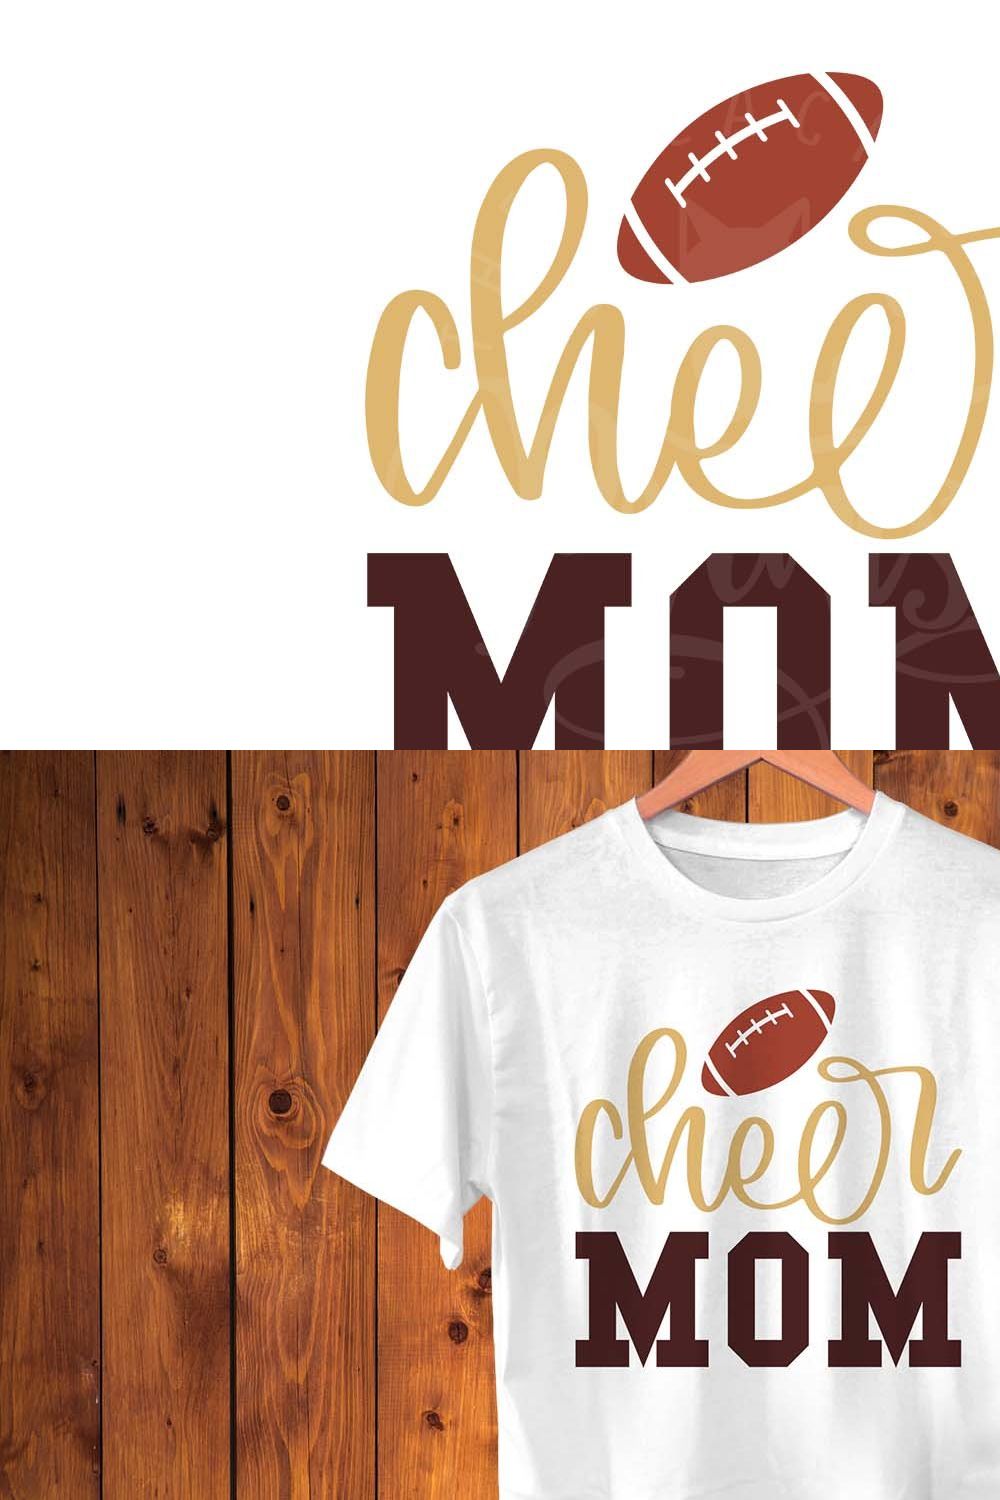 Cheer Mom SVG DXF EPS PNG pinterest preview image.